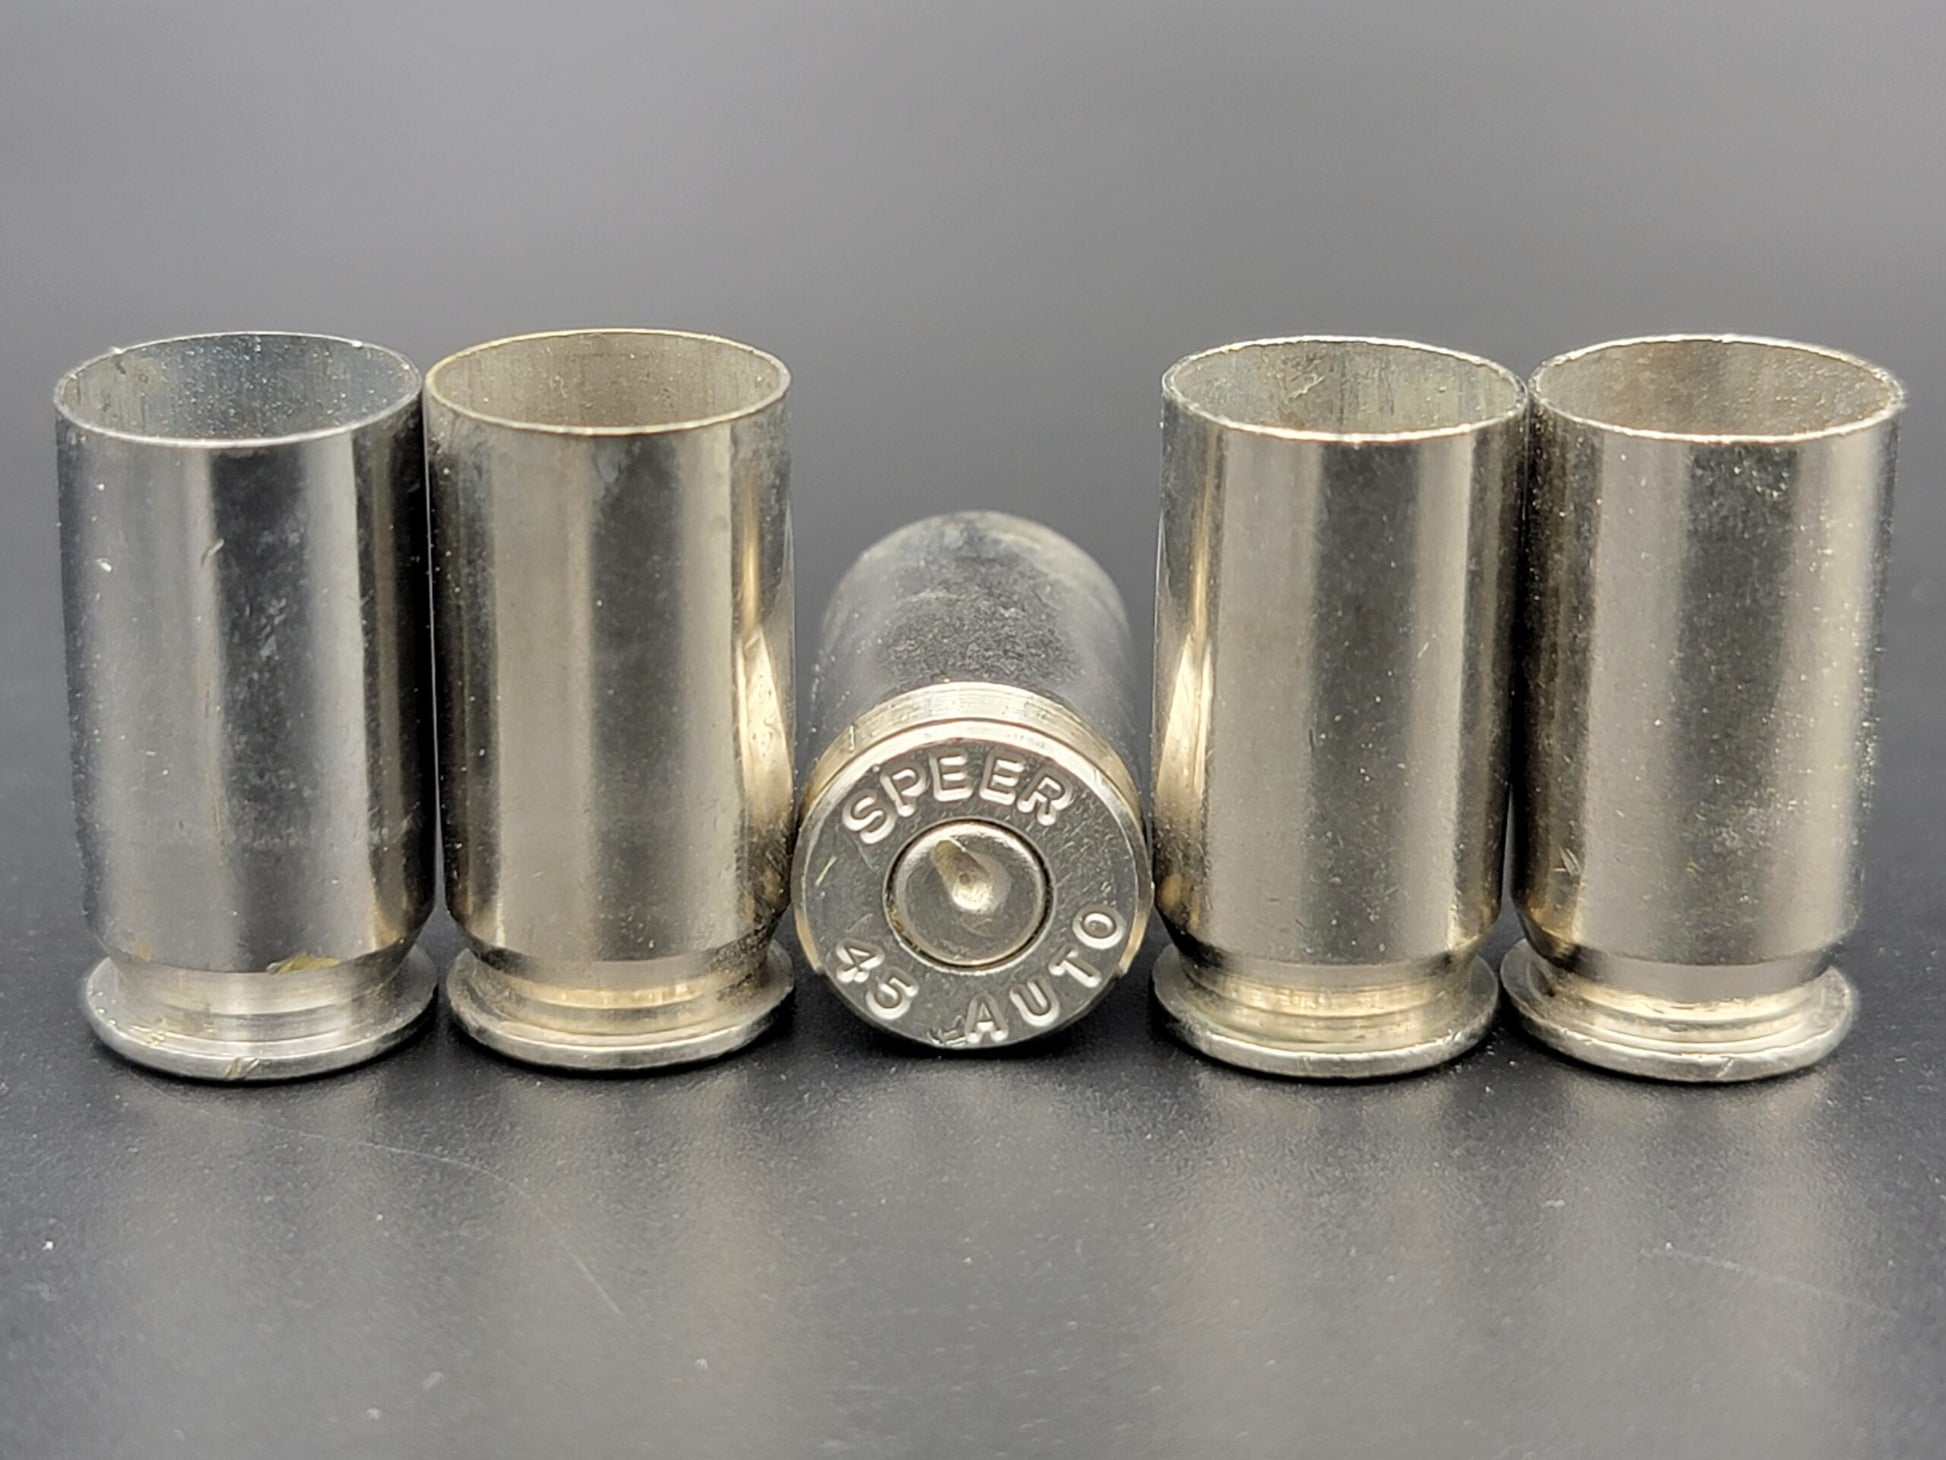 45 ACP LP/SP once fired pistol nickel. Hand sorted from reputable indoor/military ranges for reloading. Reliable spent casings for precision shooting.